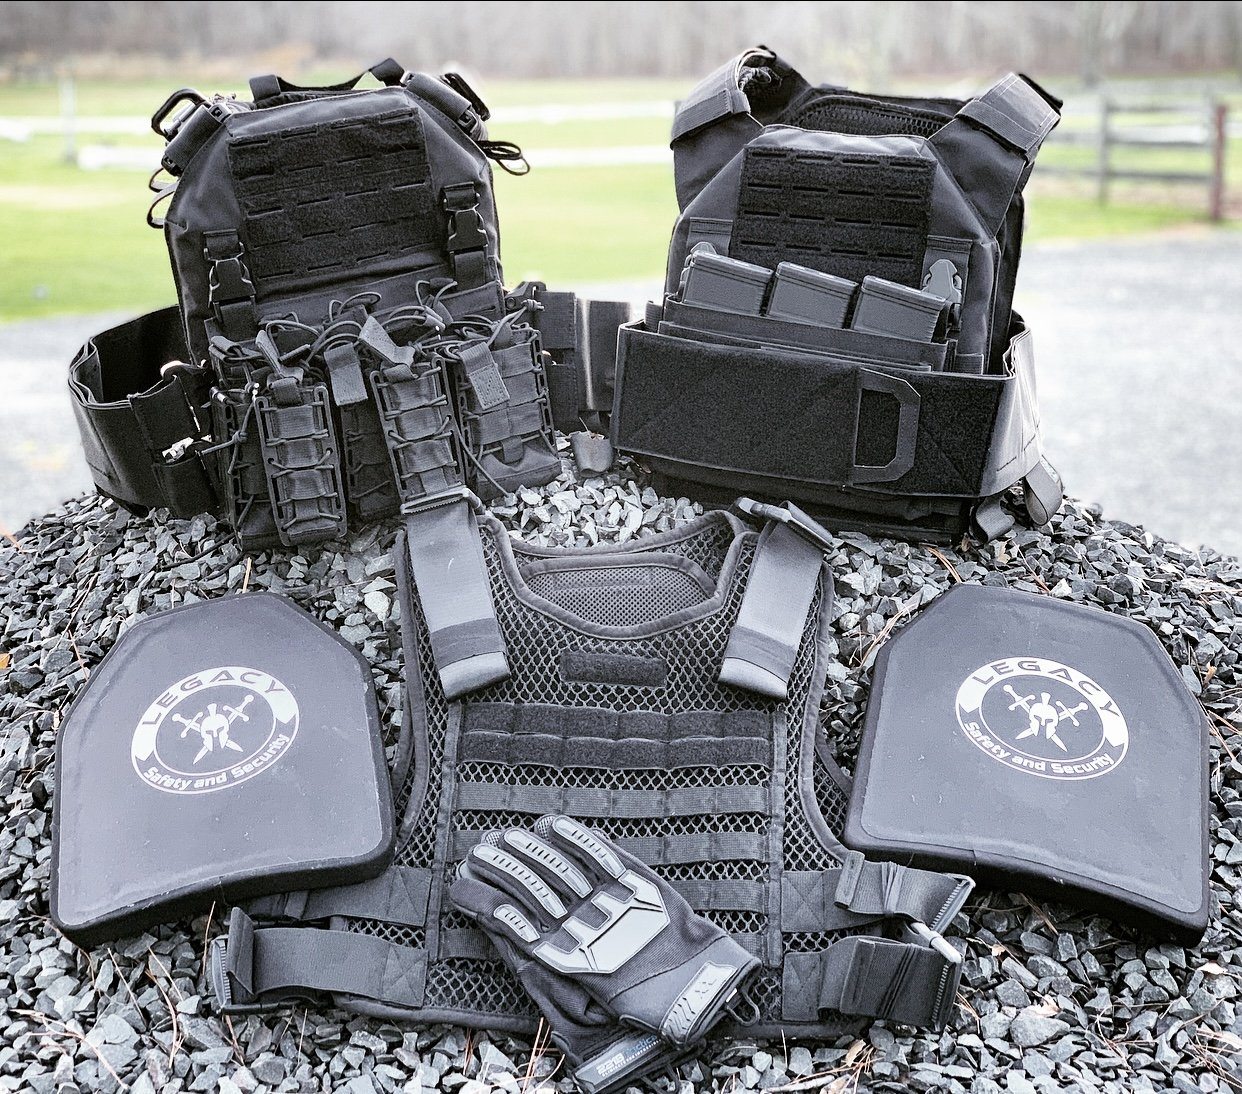 Level III and Level IV Lightweight Body Armor and Plate Carriers In Stock With No Lead Time - No Waiting